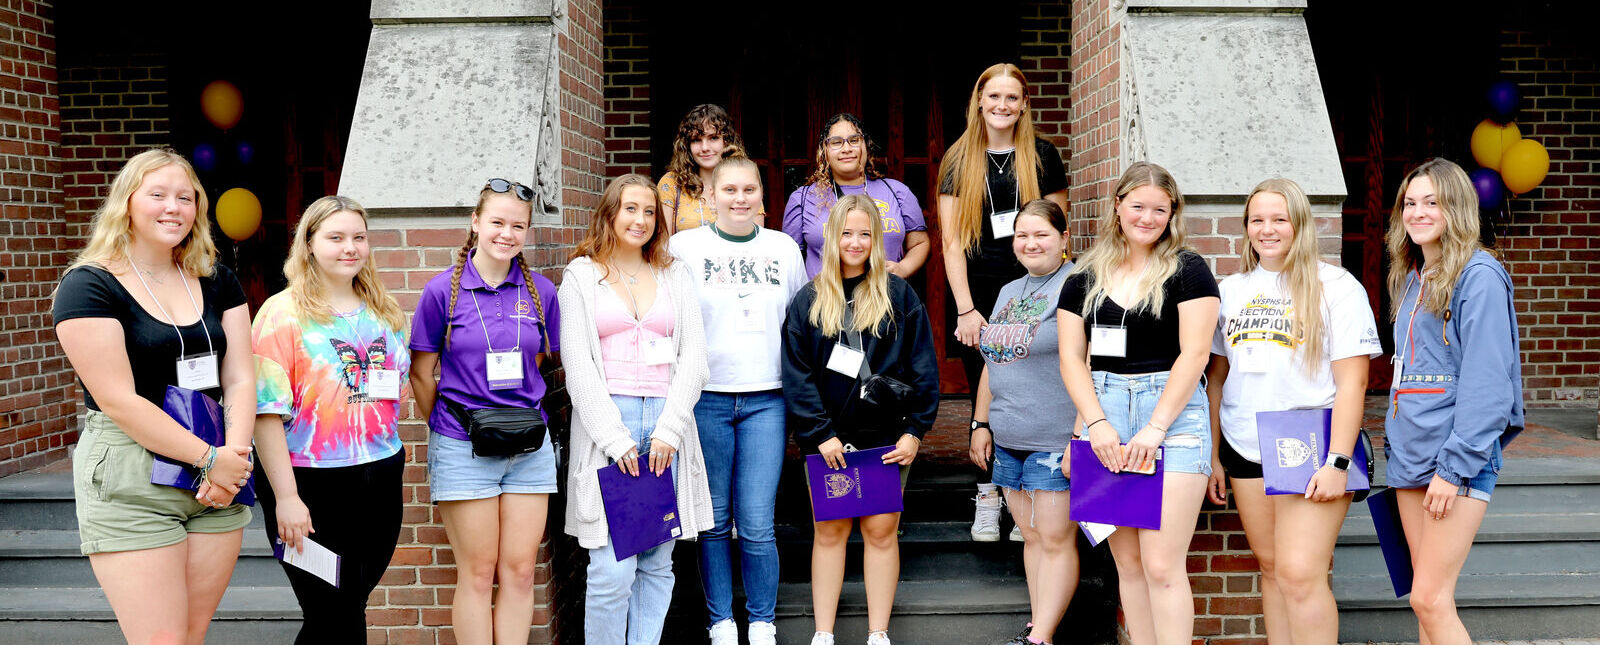 A group of students and an orientation leader pose on the steps leading up to the Gibson Theatre entrance during an orientation event